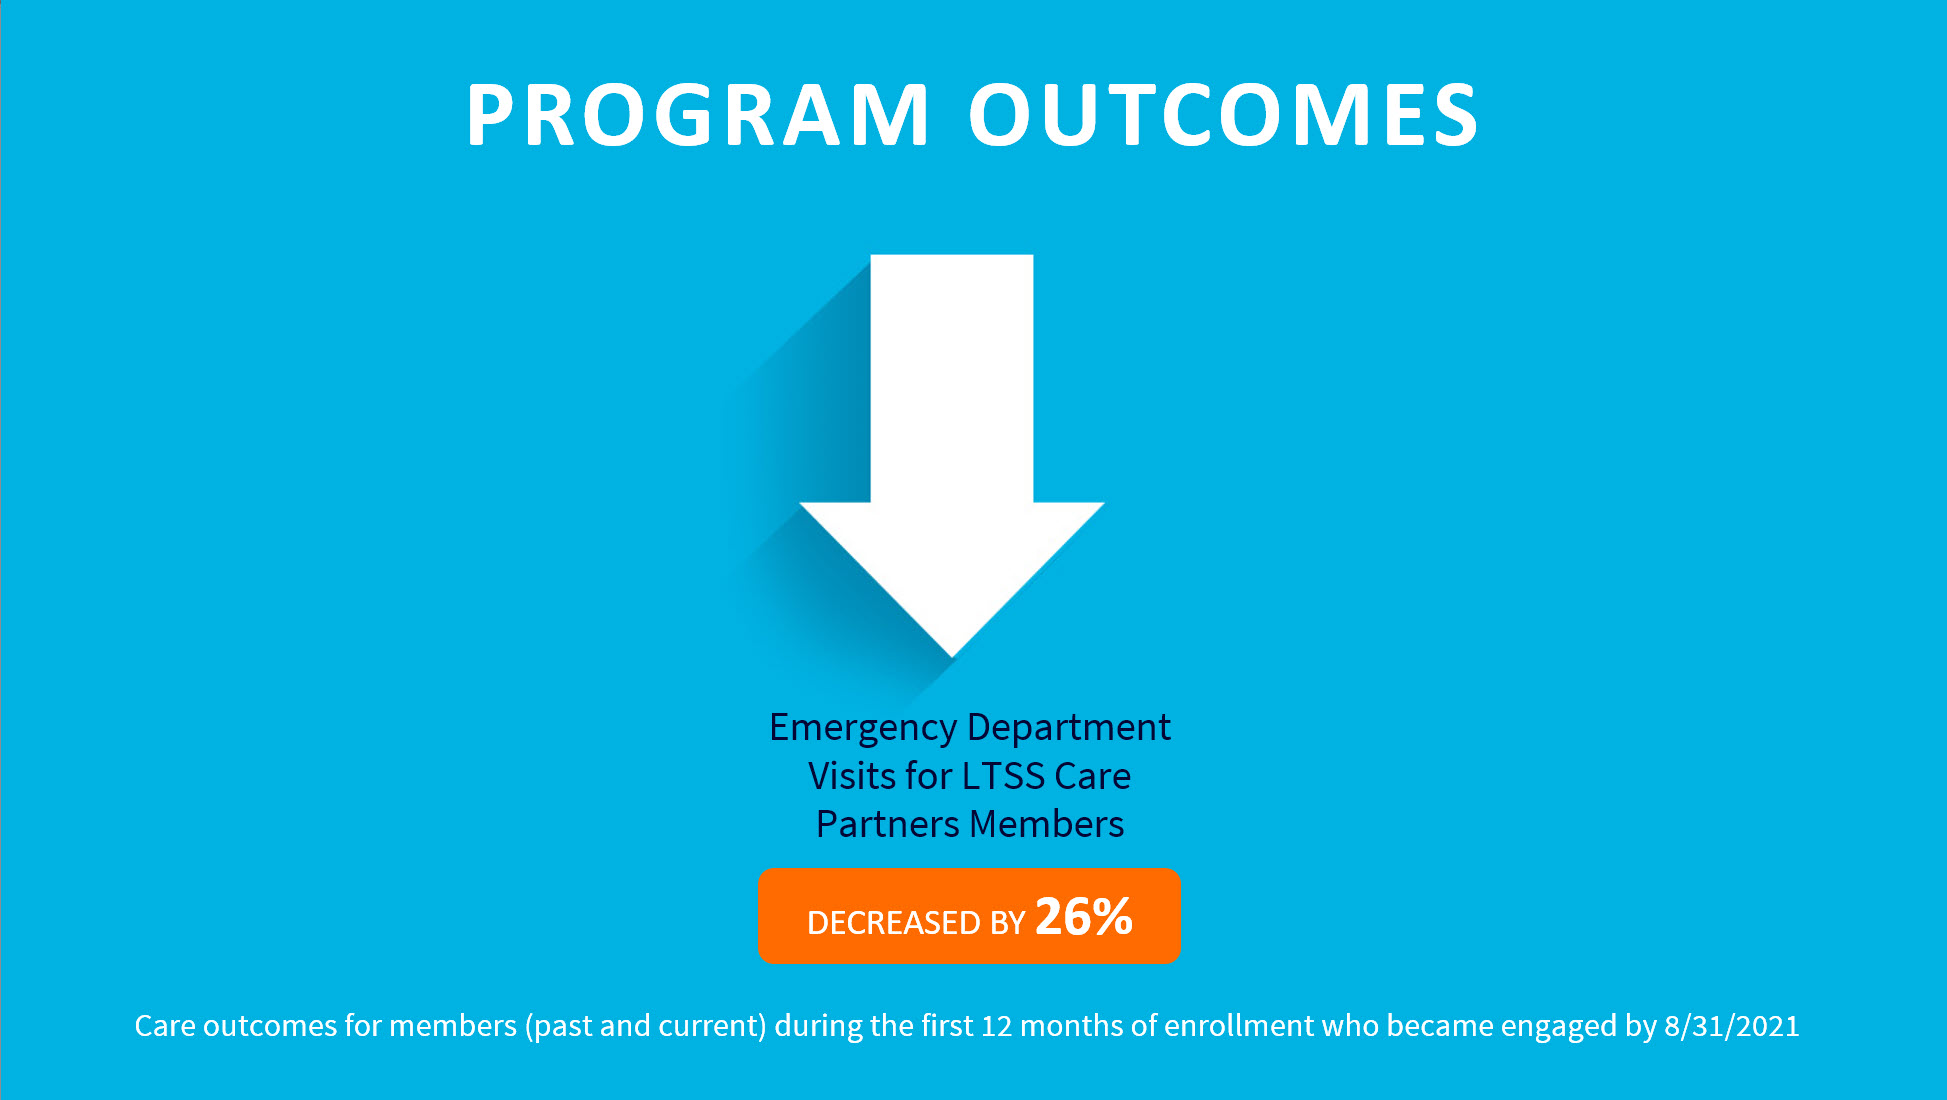 LTSS Care Partners Member Program Outcomes